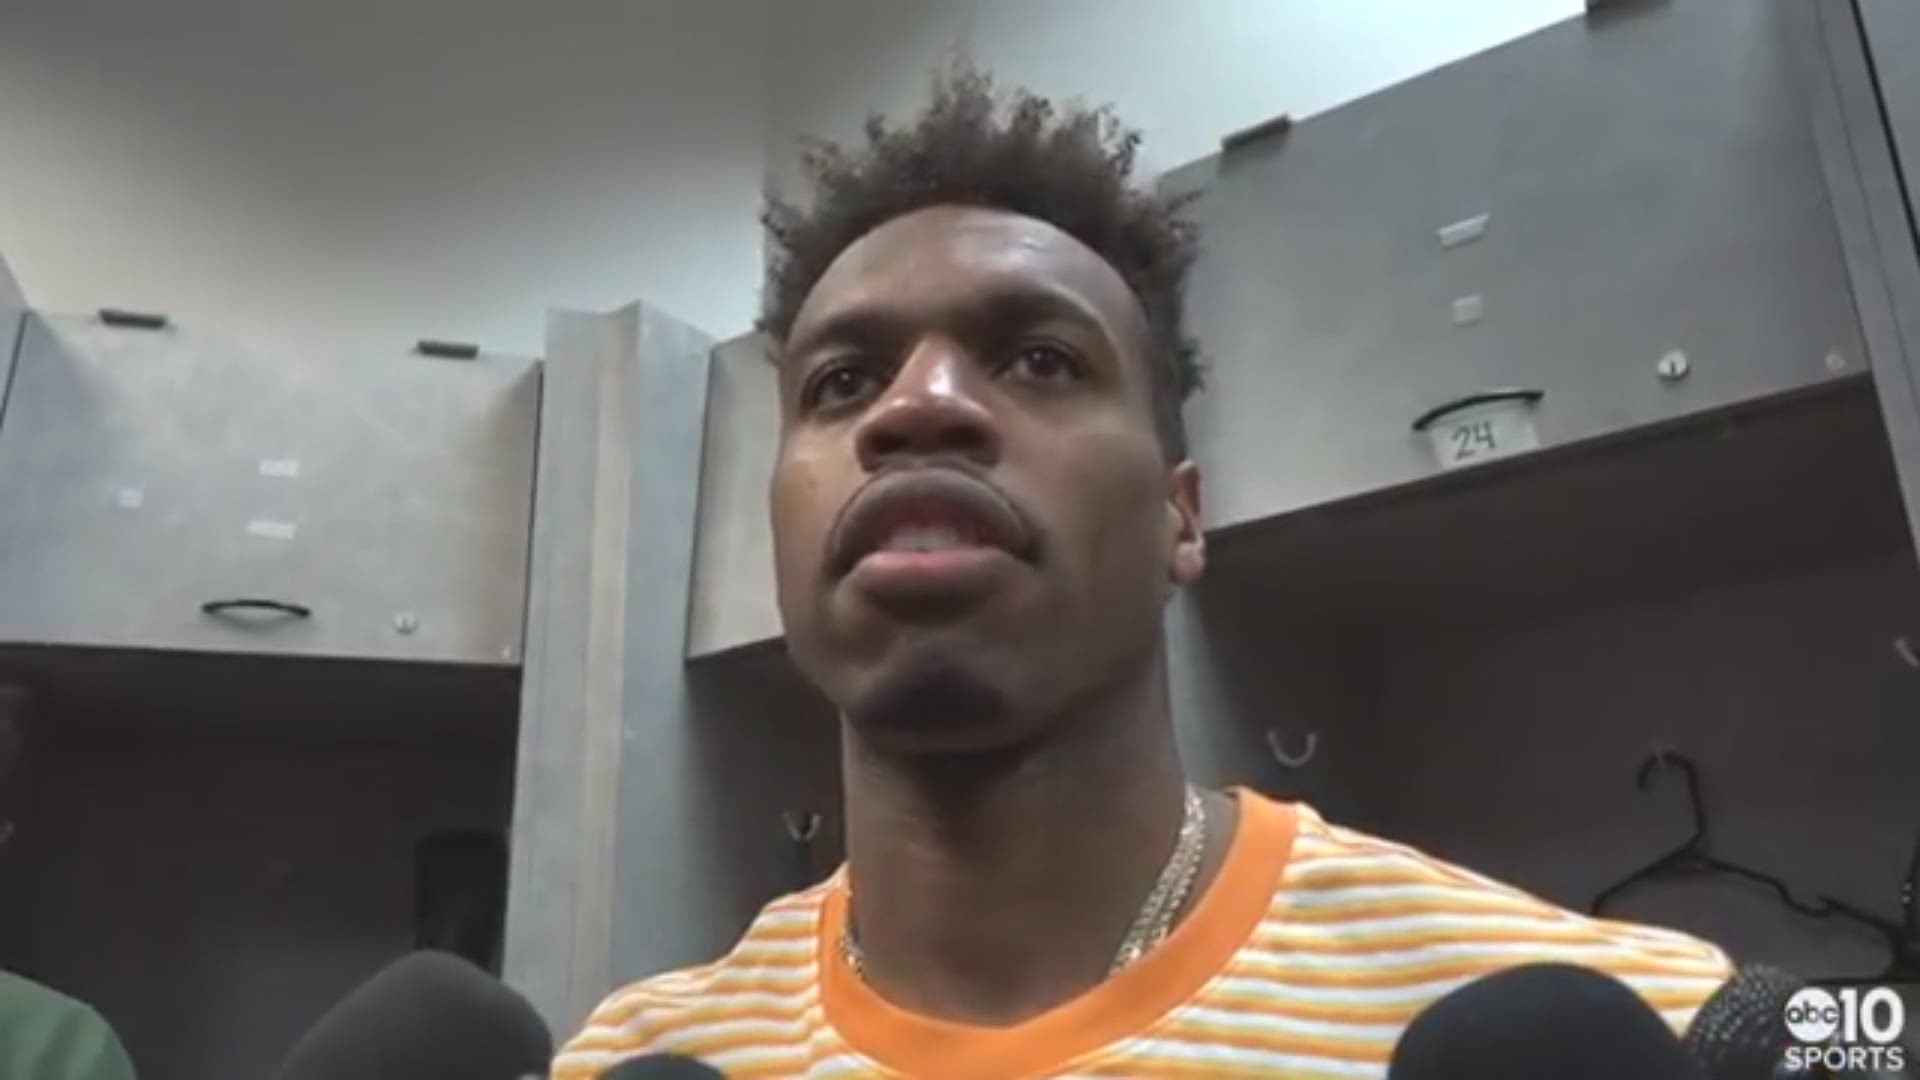 Kings guard Buddy Hield talks about his regrets over not taking the three-point opportunity he had in the final possession of Thursday's loss in Oakland to the Golden State Warriors. He talks about the closely contested season series and hope to see them in the playoffs.